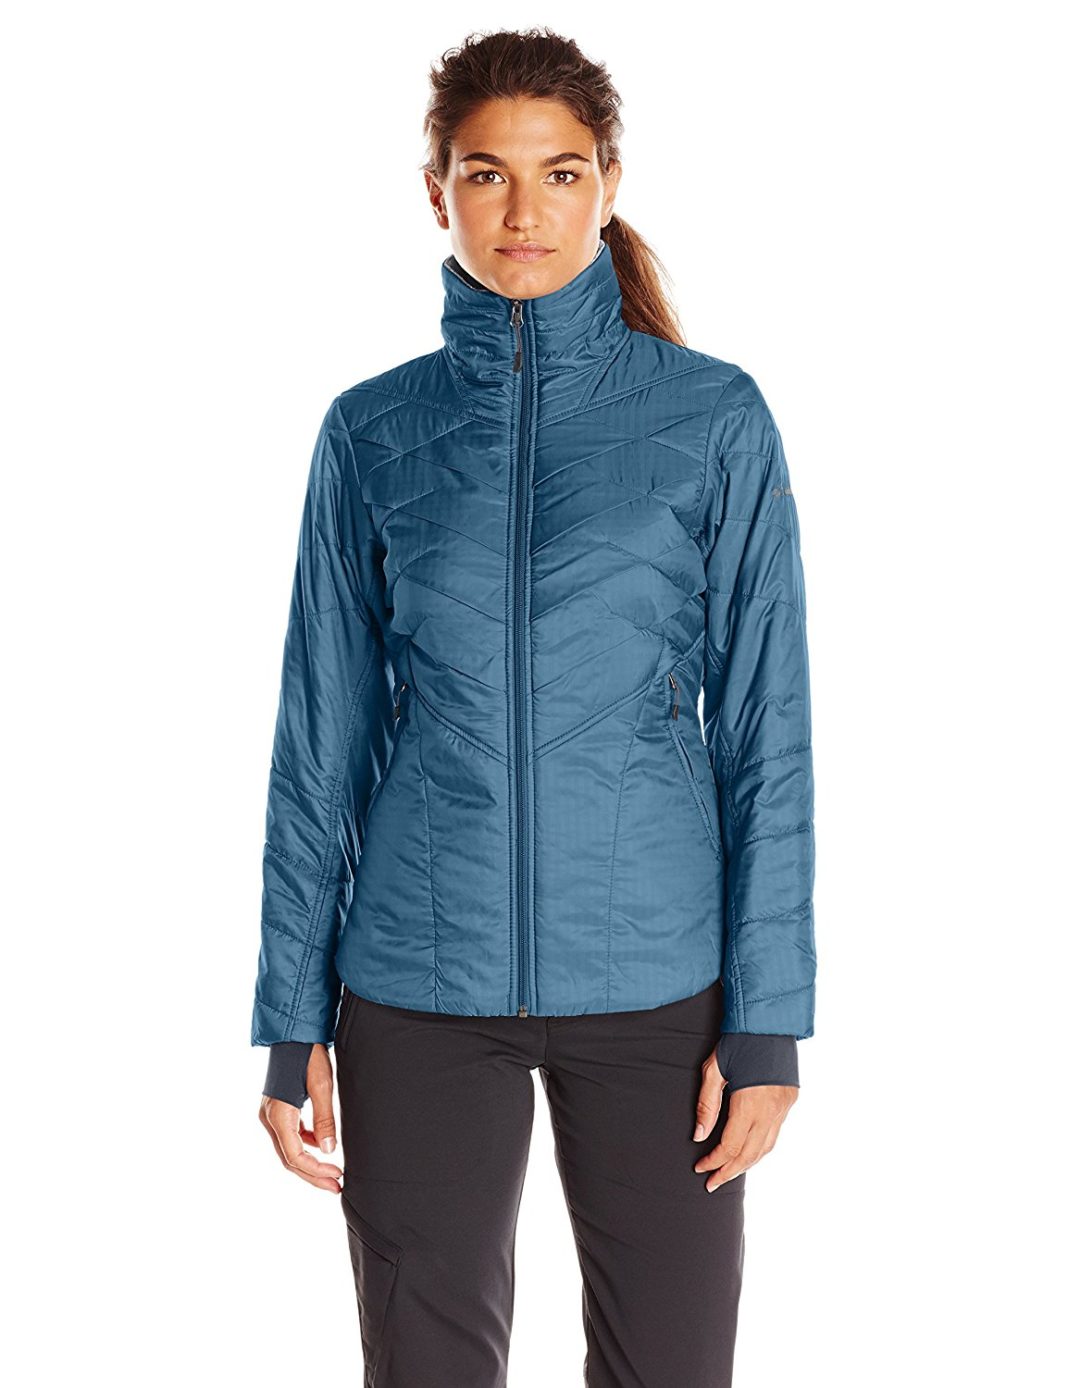 best down jackets for women - Columbia